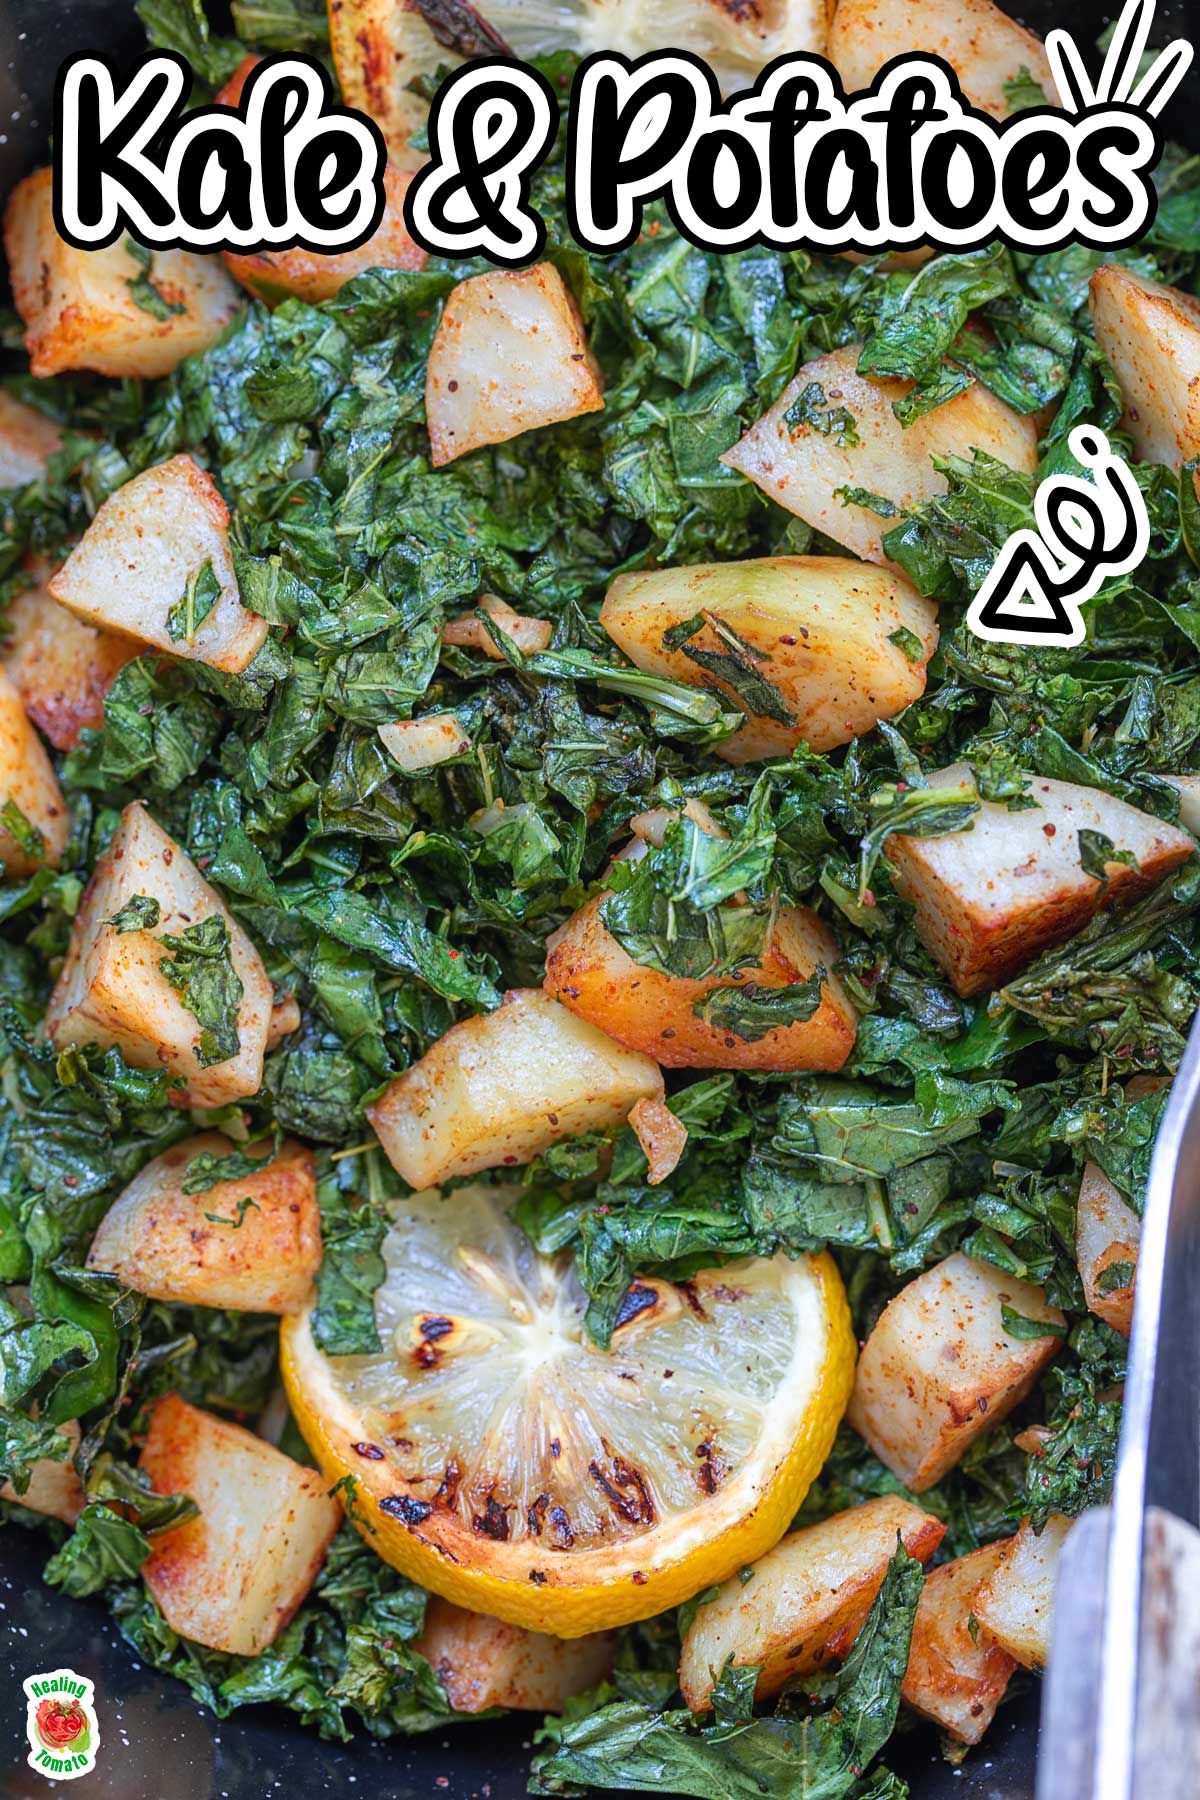 Closeup view of the kale and potatoes in the pan